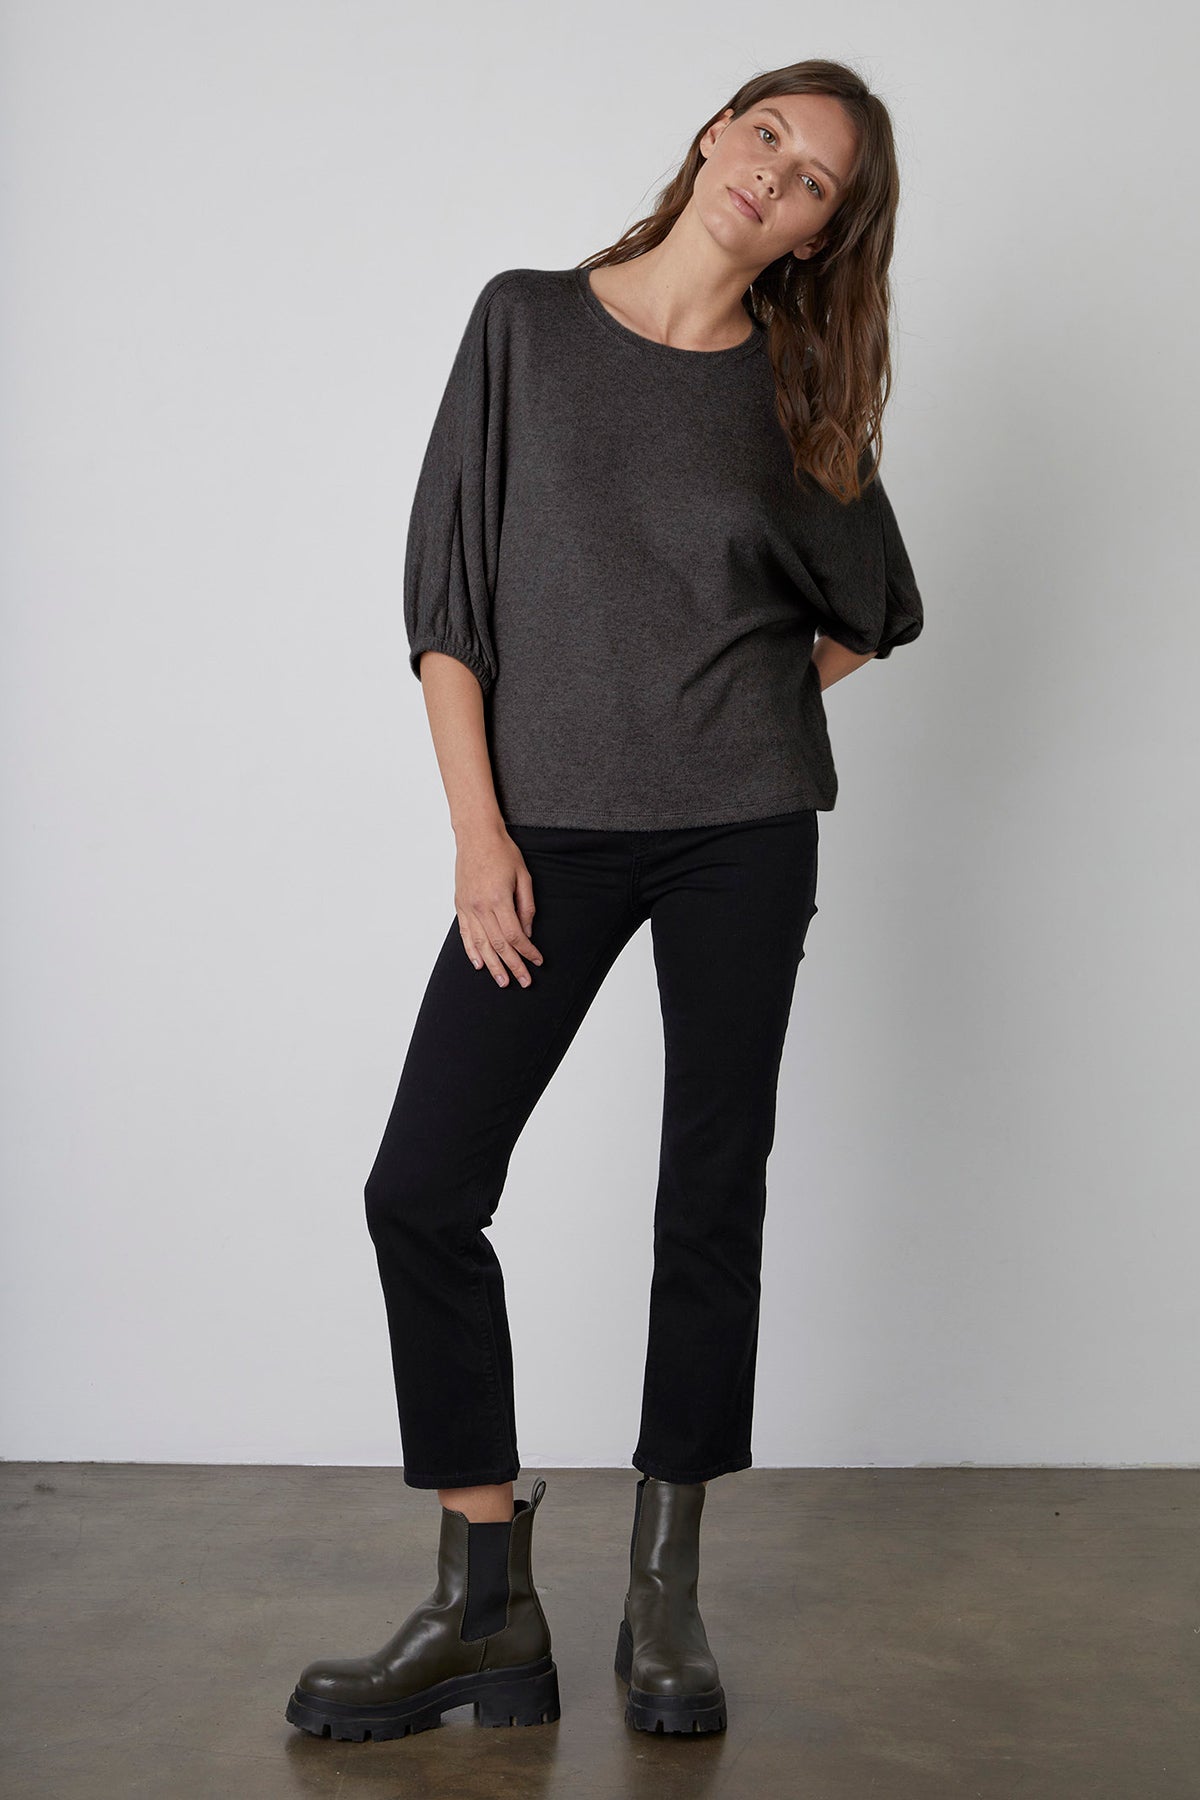   Makayla Crew Neck Pullover in anthracite dark grey front full length with black denim Kate 